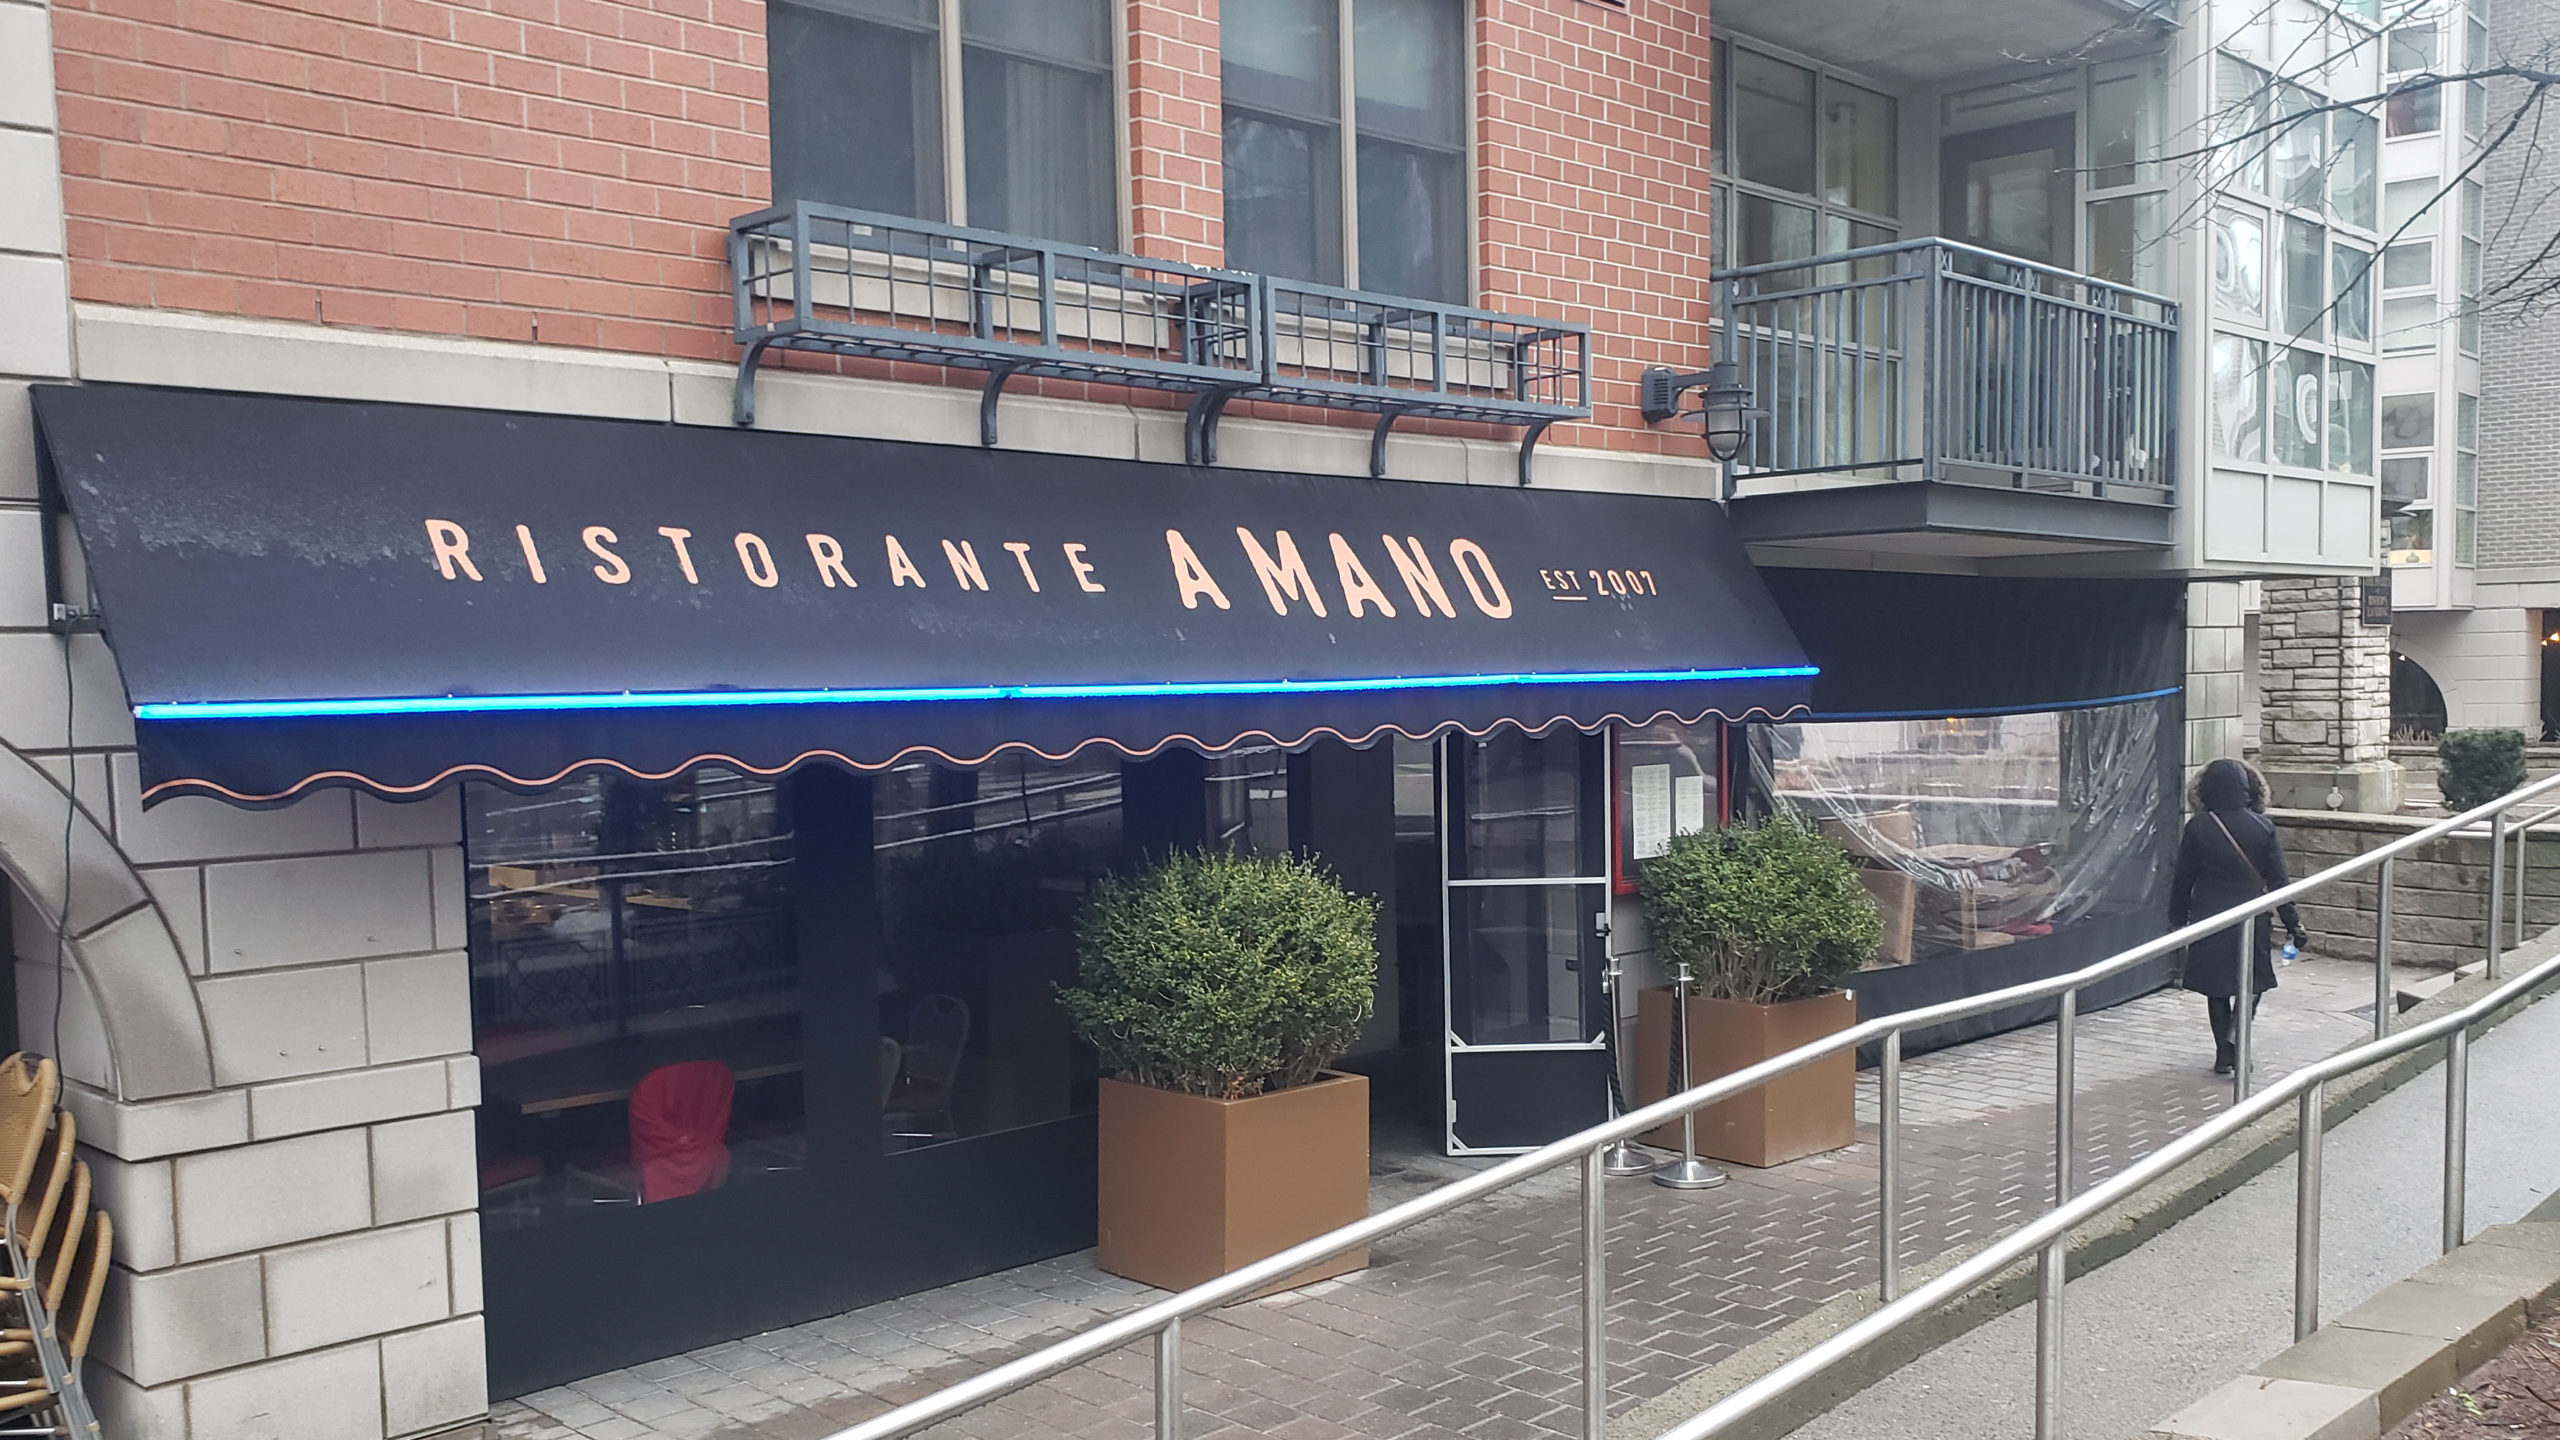 Ristorante a Mano is one of several downtown Halifax restaurants that have set up outdoor shelters for diners